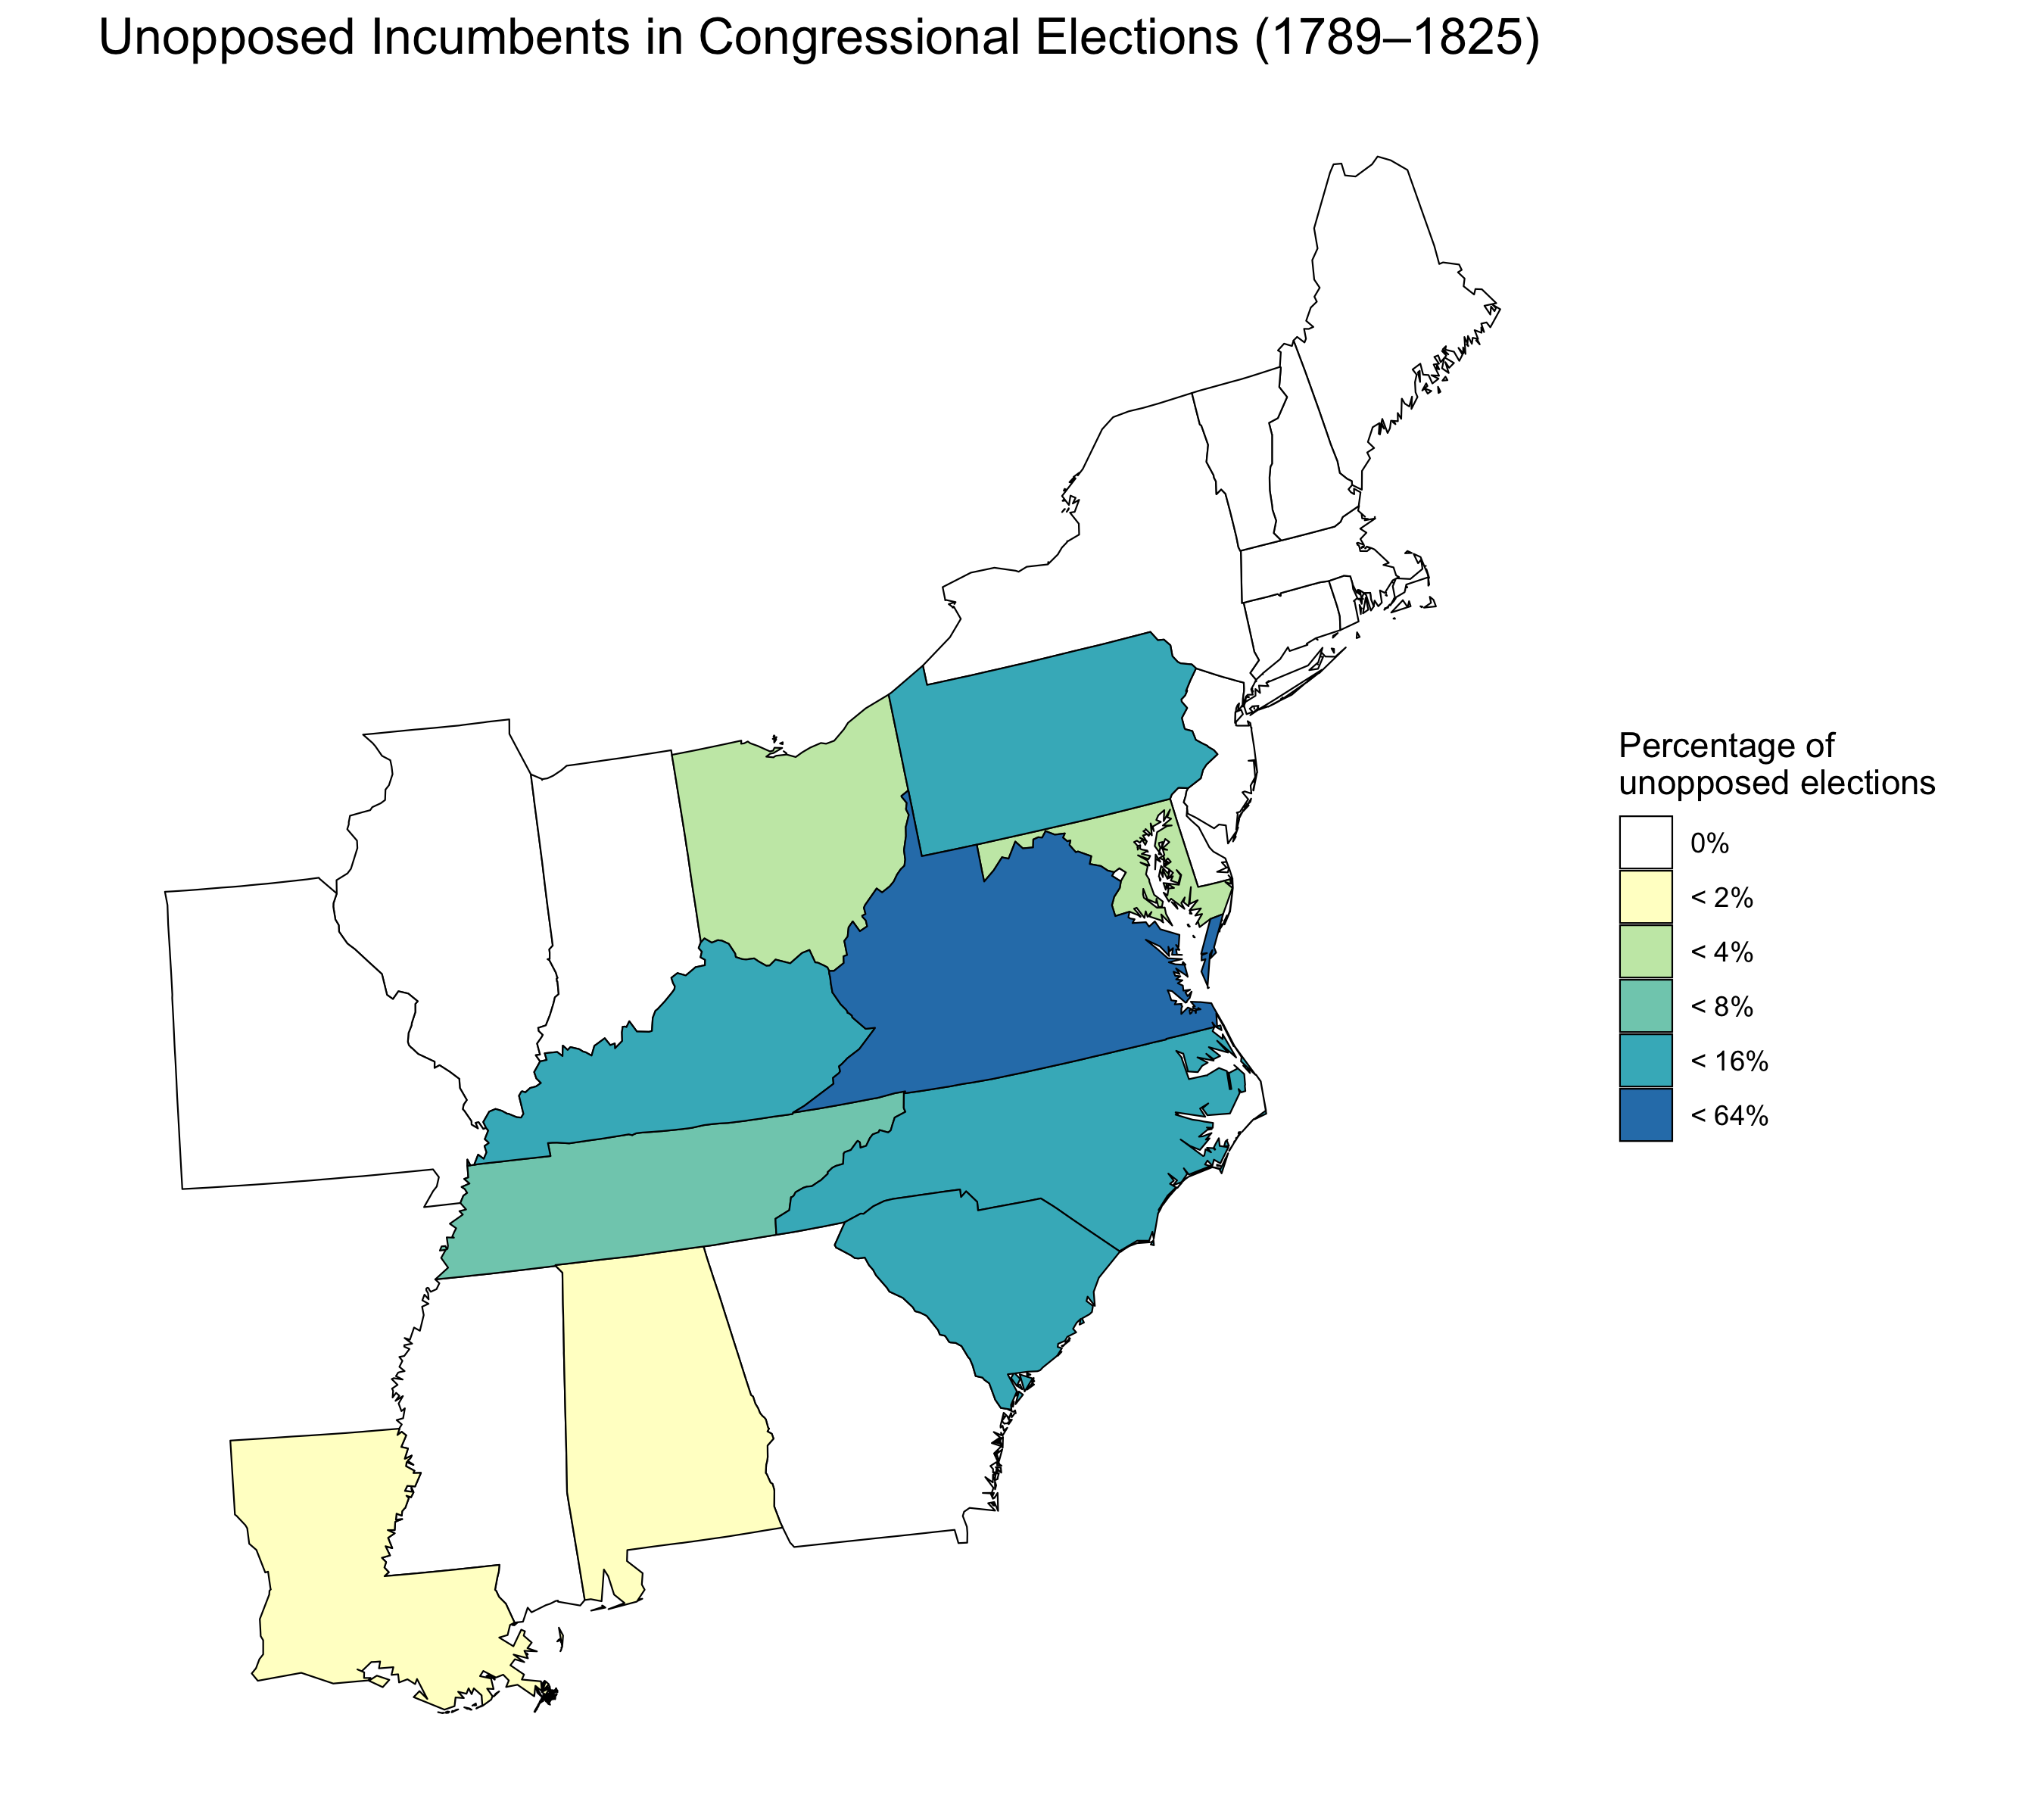 In a little over nine percent of all US congressional elections held from 1789–1825, incumbent candidates (current office holders) faced no political rivals and were re-elected without opposition. This map breaks down these elections by state, showing the percentage of elections held in each state that were won by unopposed incumbents. As the map shows, the largest percentage of unopposed incumbent elections were won in southern states such as Kentucky, South Carolina, North Carolina, and Virginia—the later having the highest percentage, with 45.2% of its elections won by unopposed incumbents. This suggests that despite the new language of “democratic” politics, an older style of deferential politics was still the accepted practice in the South for at least the first thirty years of US Congressional elections.